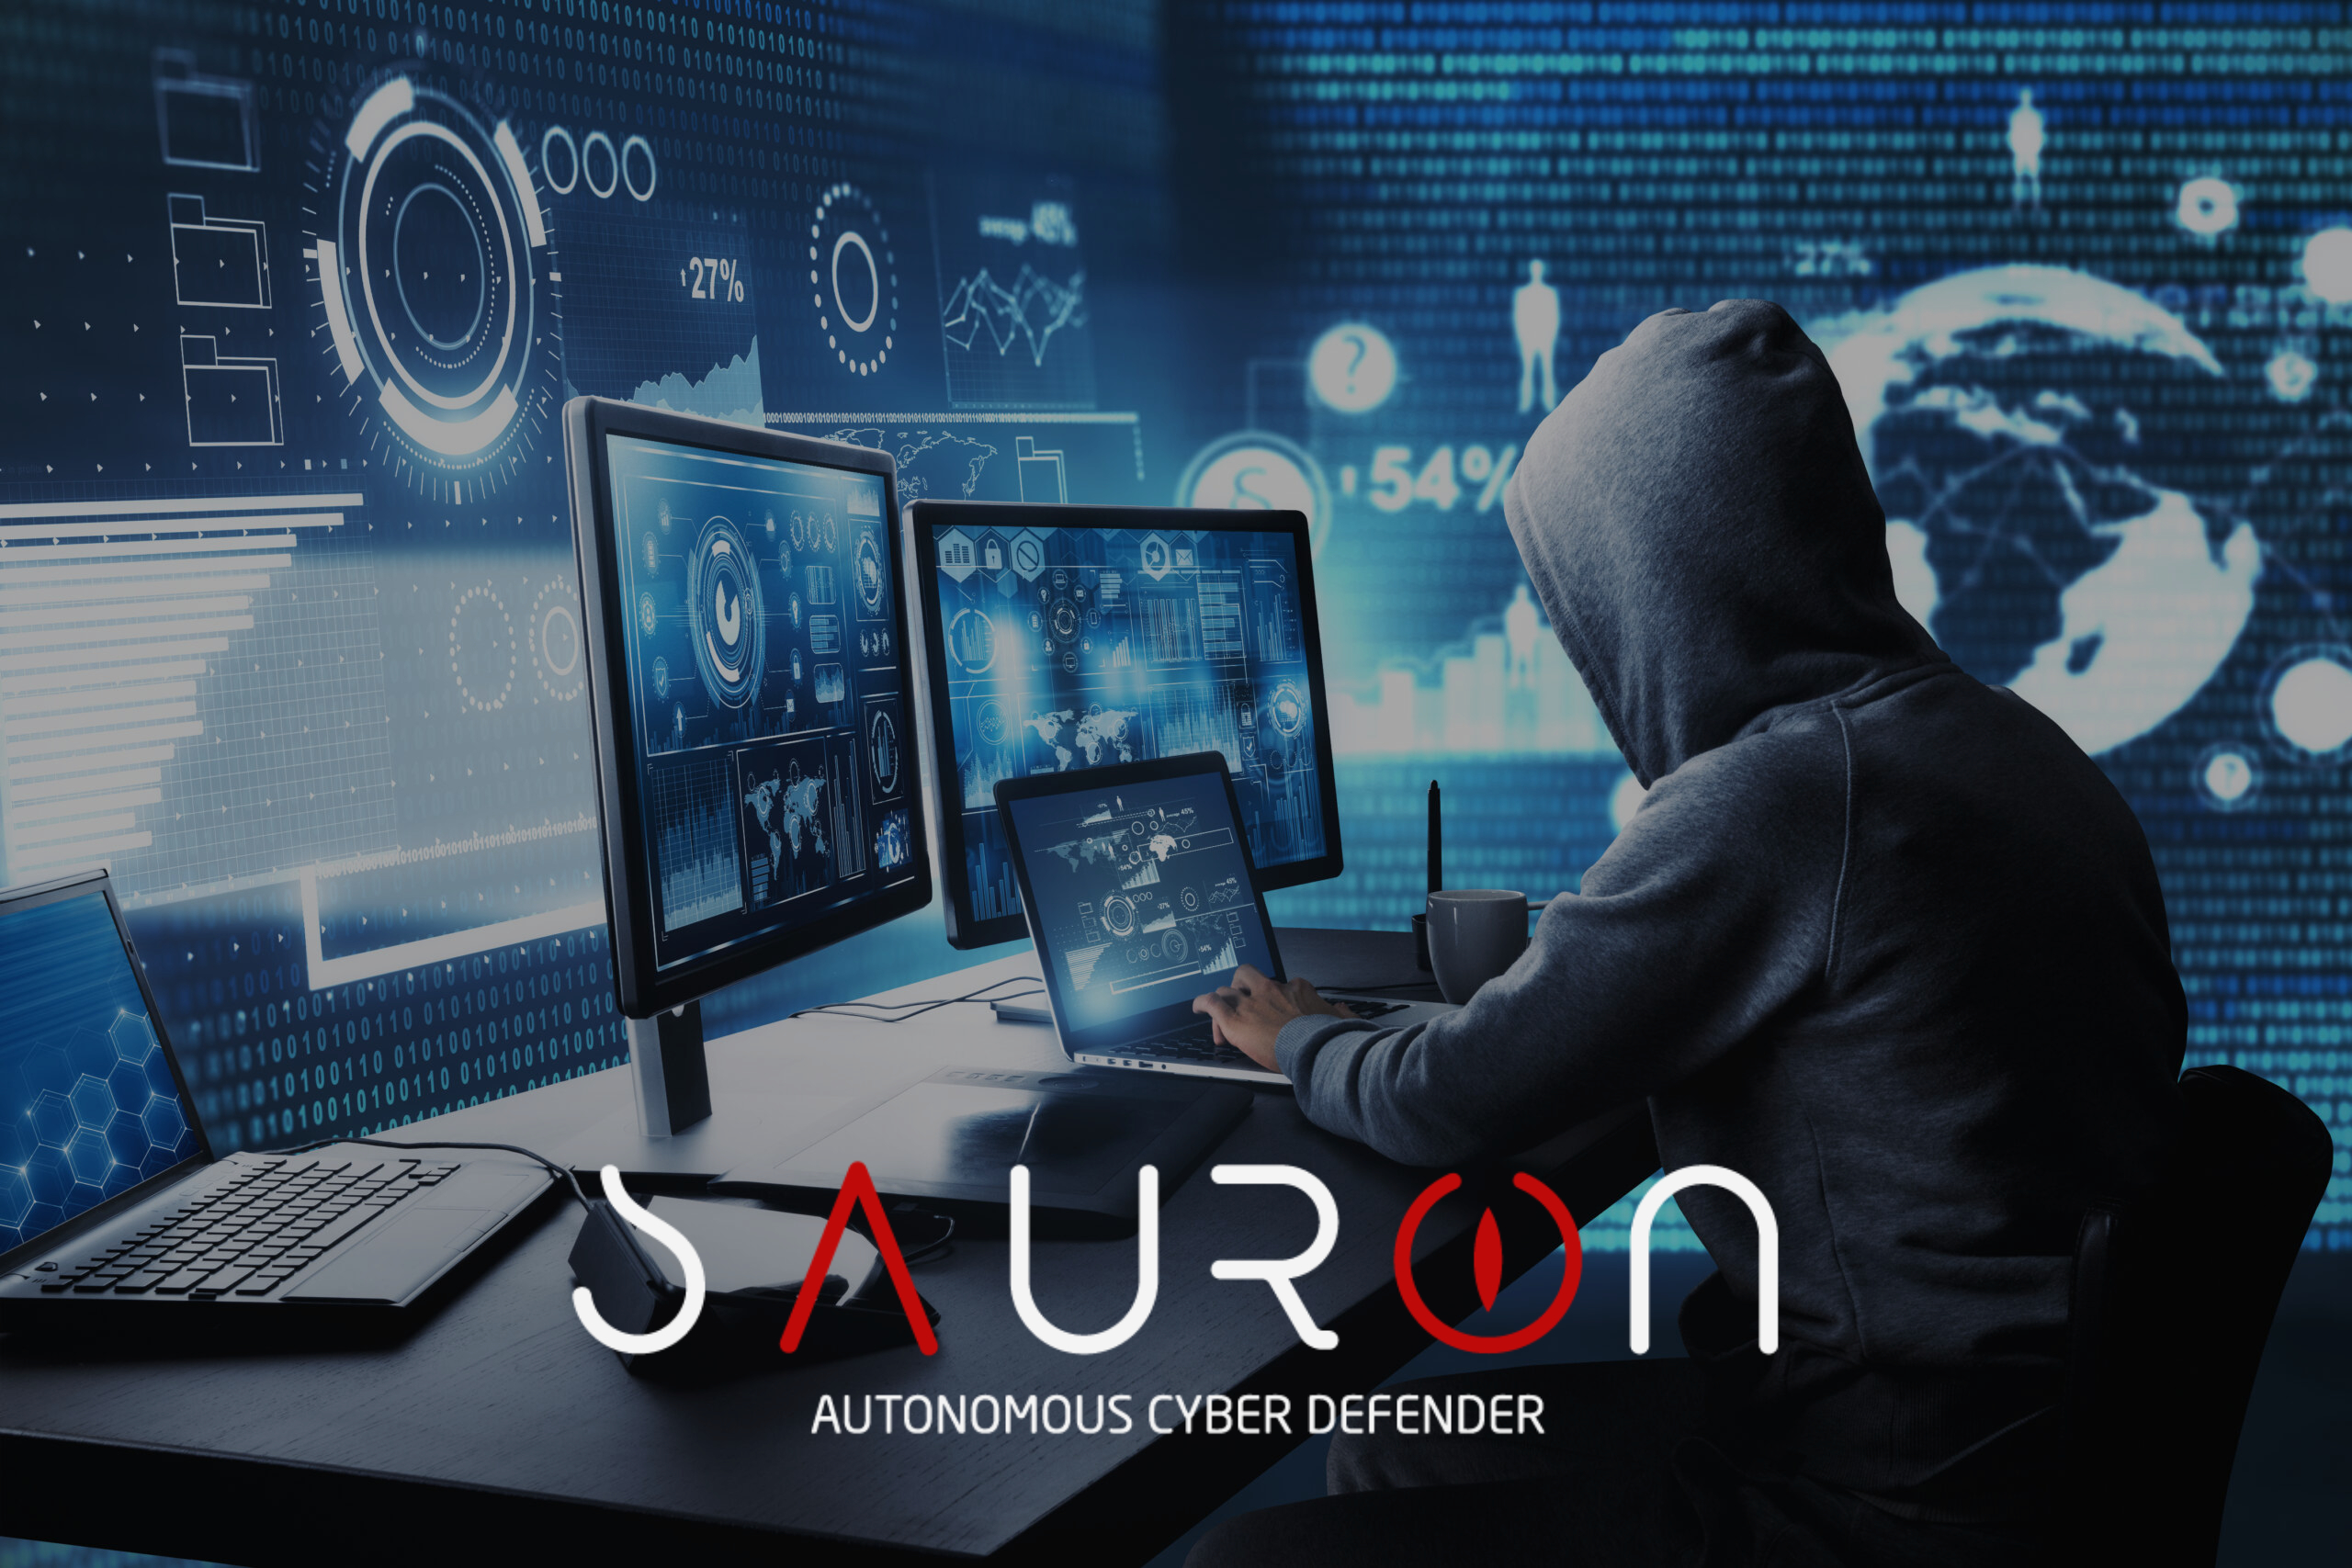 SAURON IS HERE, THE MOST ADVANCED CYBER DEFENDER EQUIPPED WITH SYNTHETIC PSYCHE